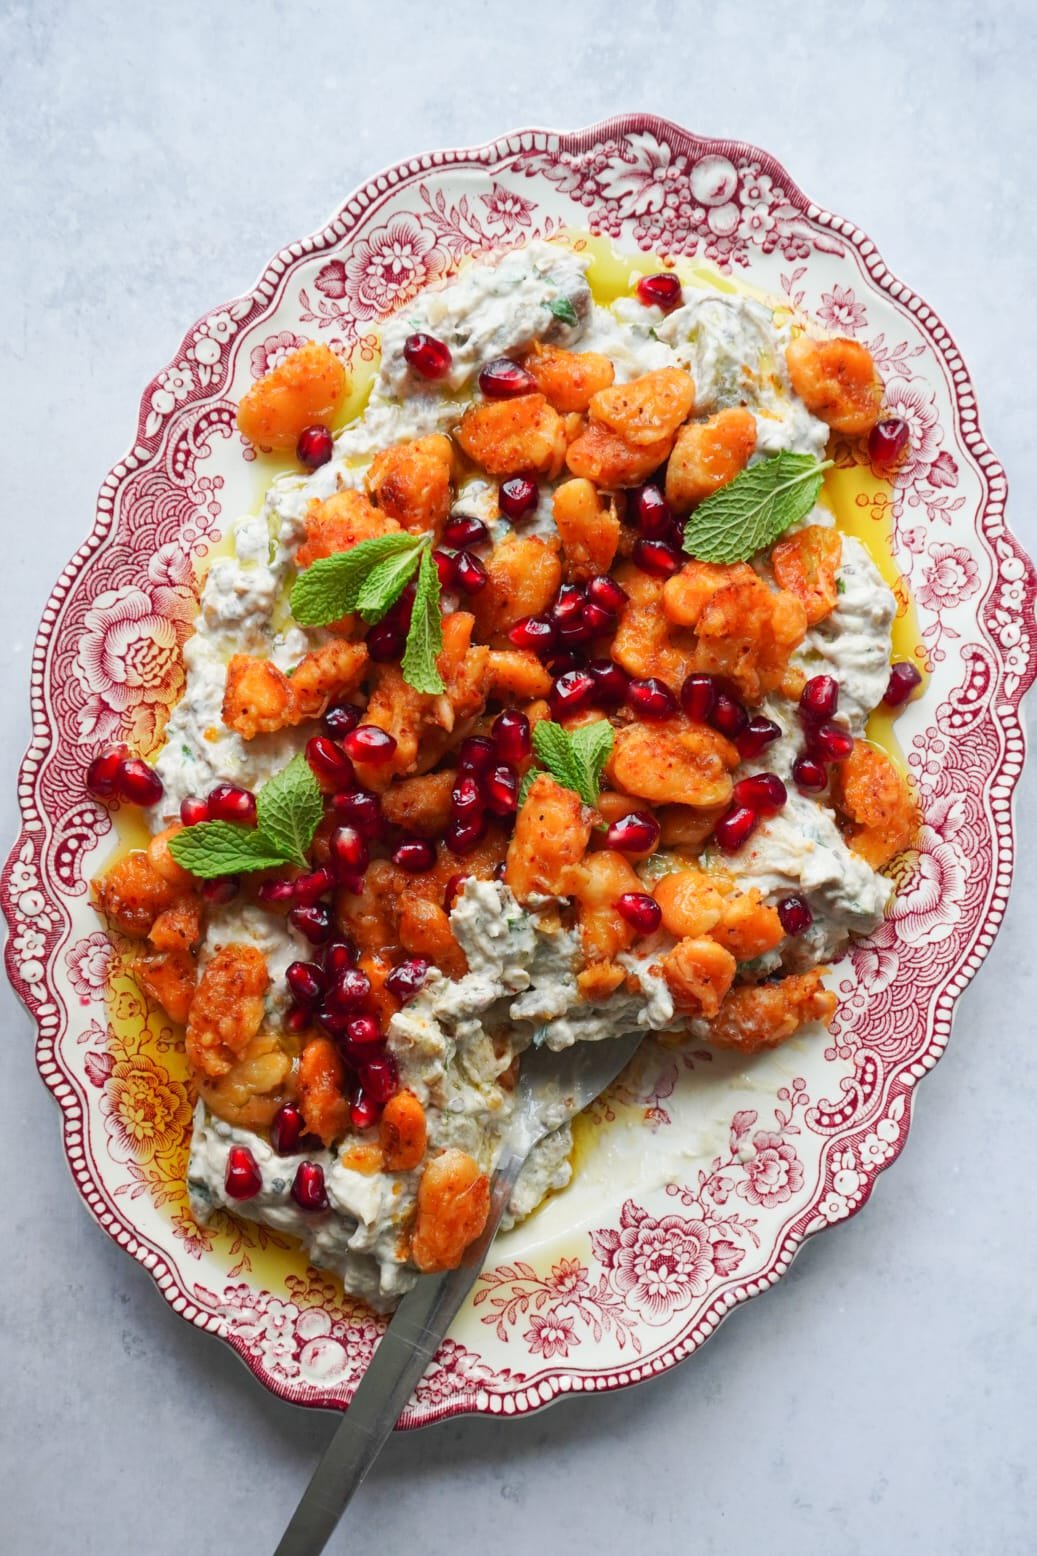 Perfect for festive season, this Tahini Walnut Aubergine Dip with Crispy Butter Beans is absolutely delicious.